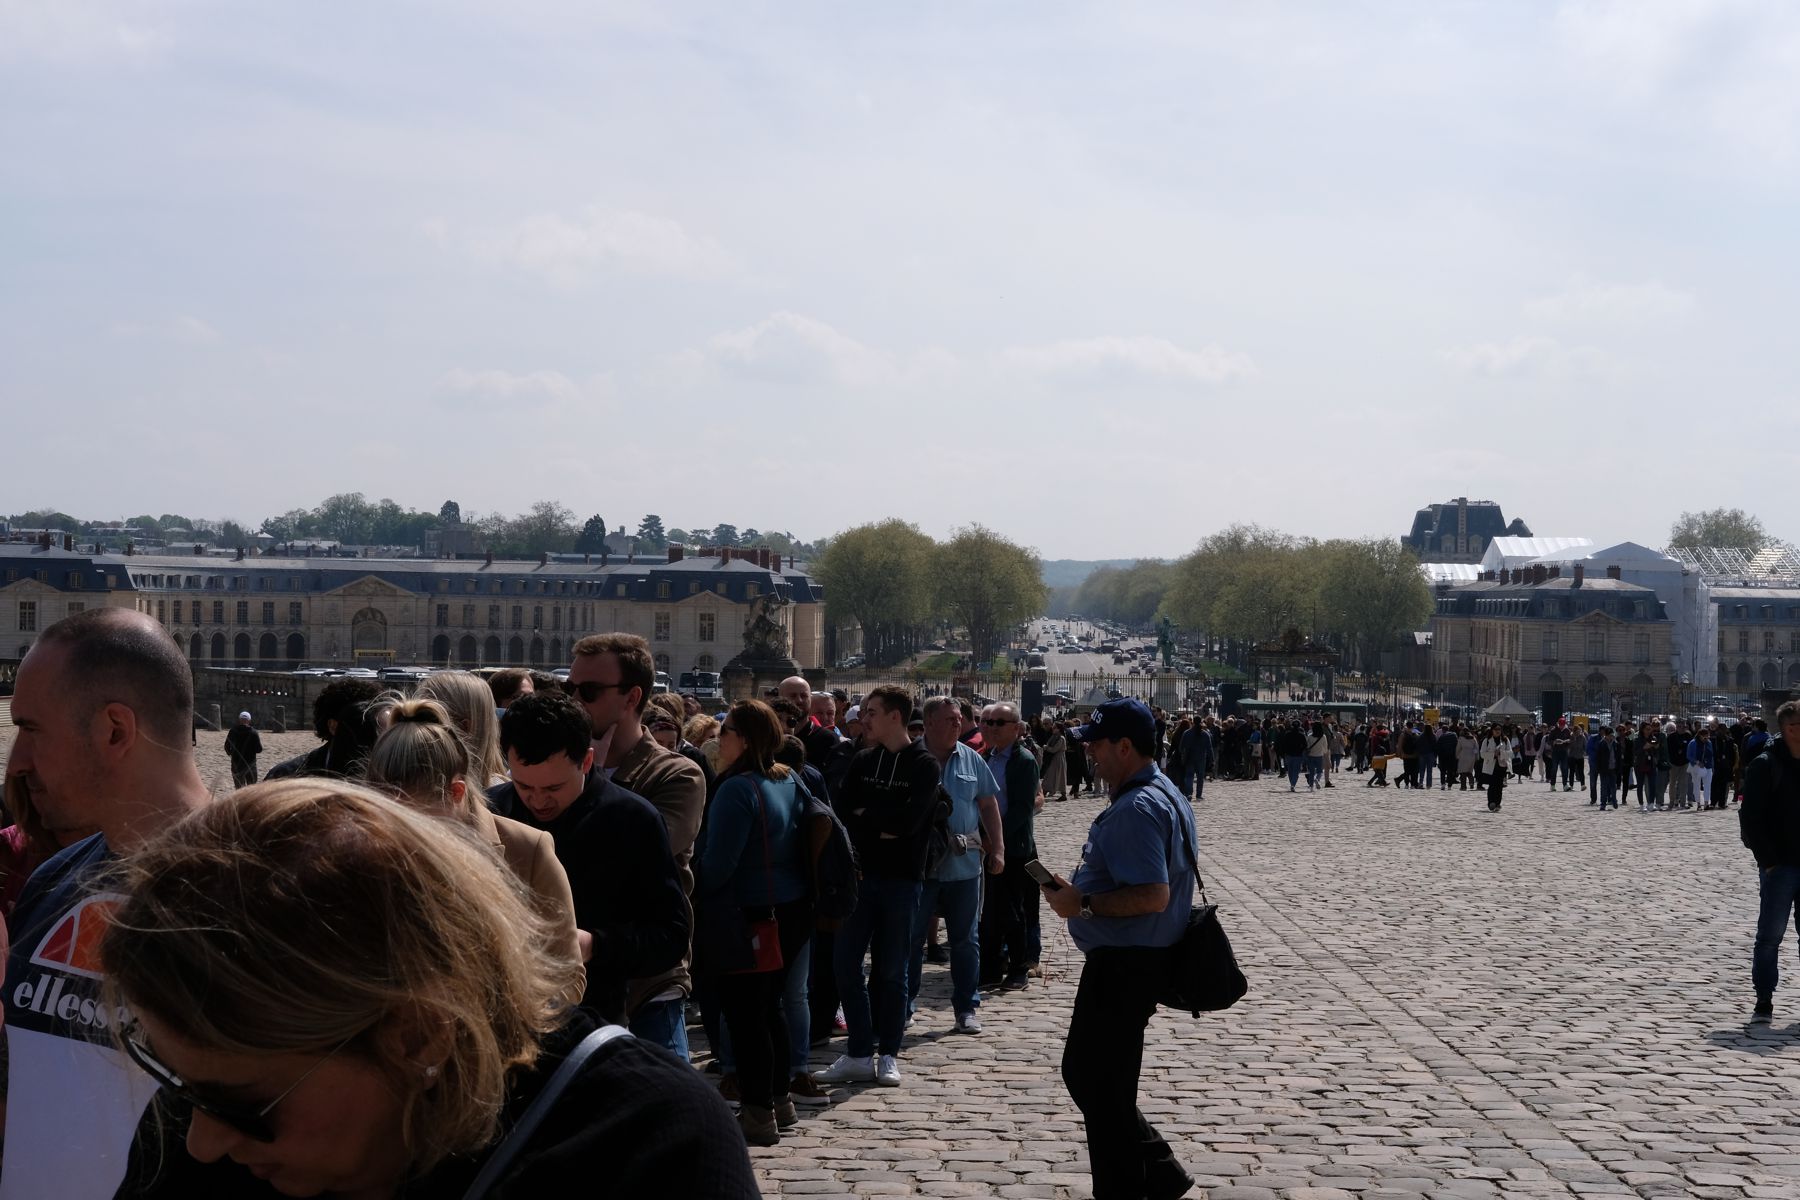 Queue to get into Versaille Palace (with e-ticket).